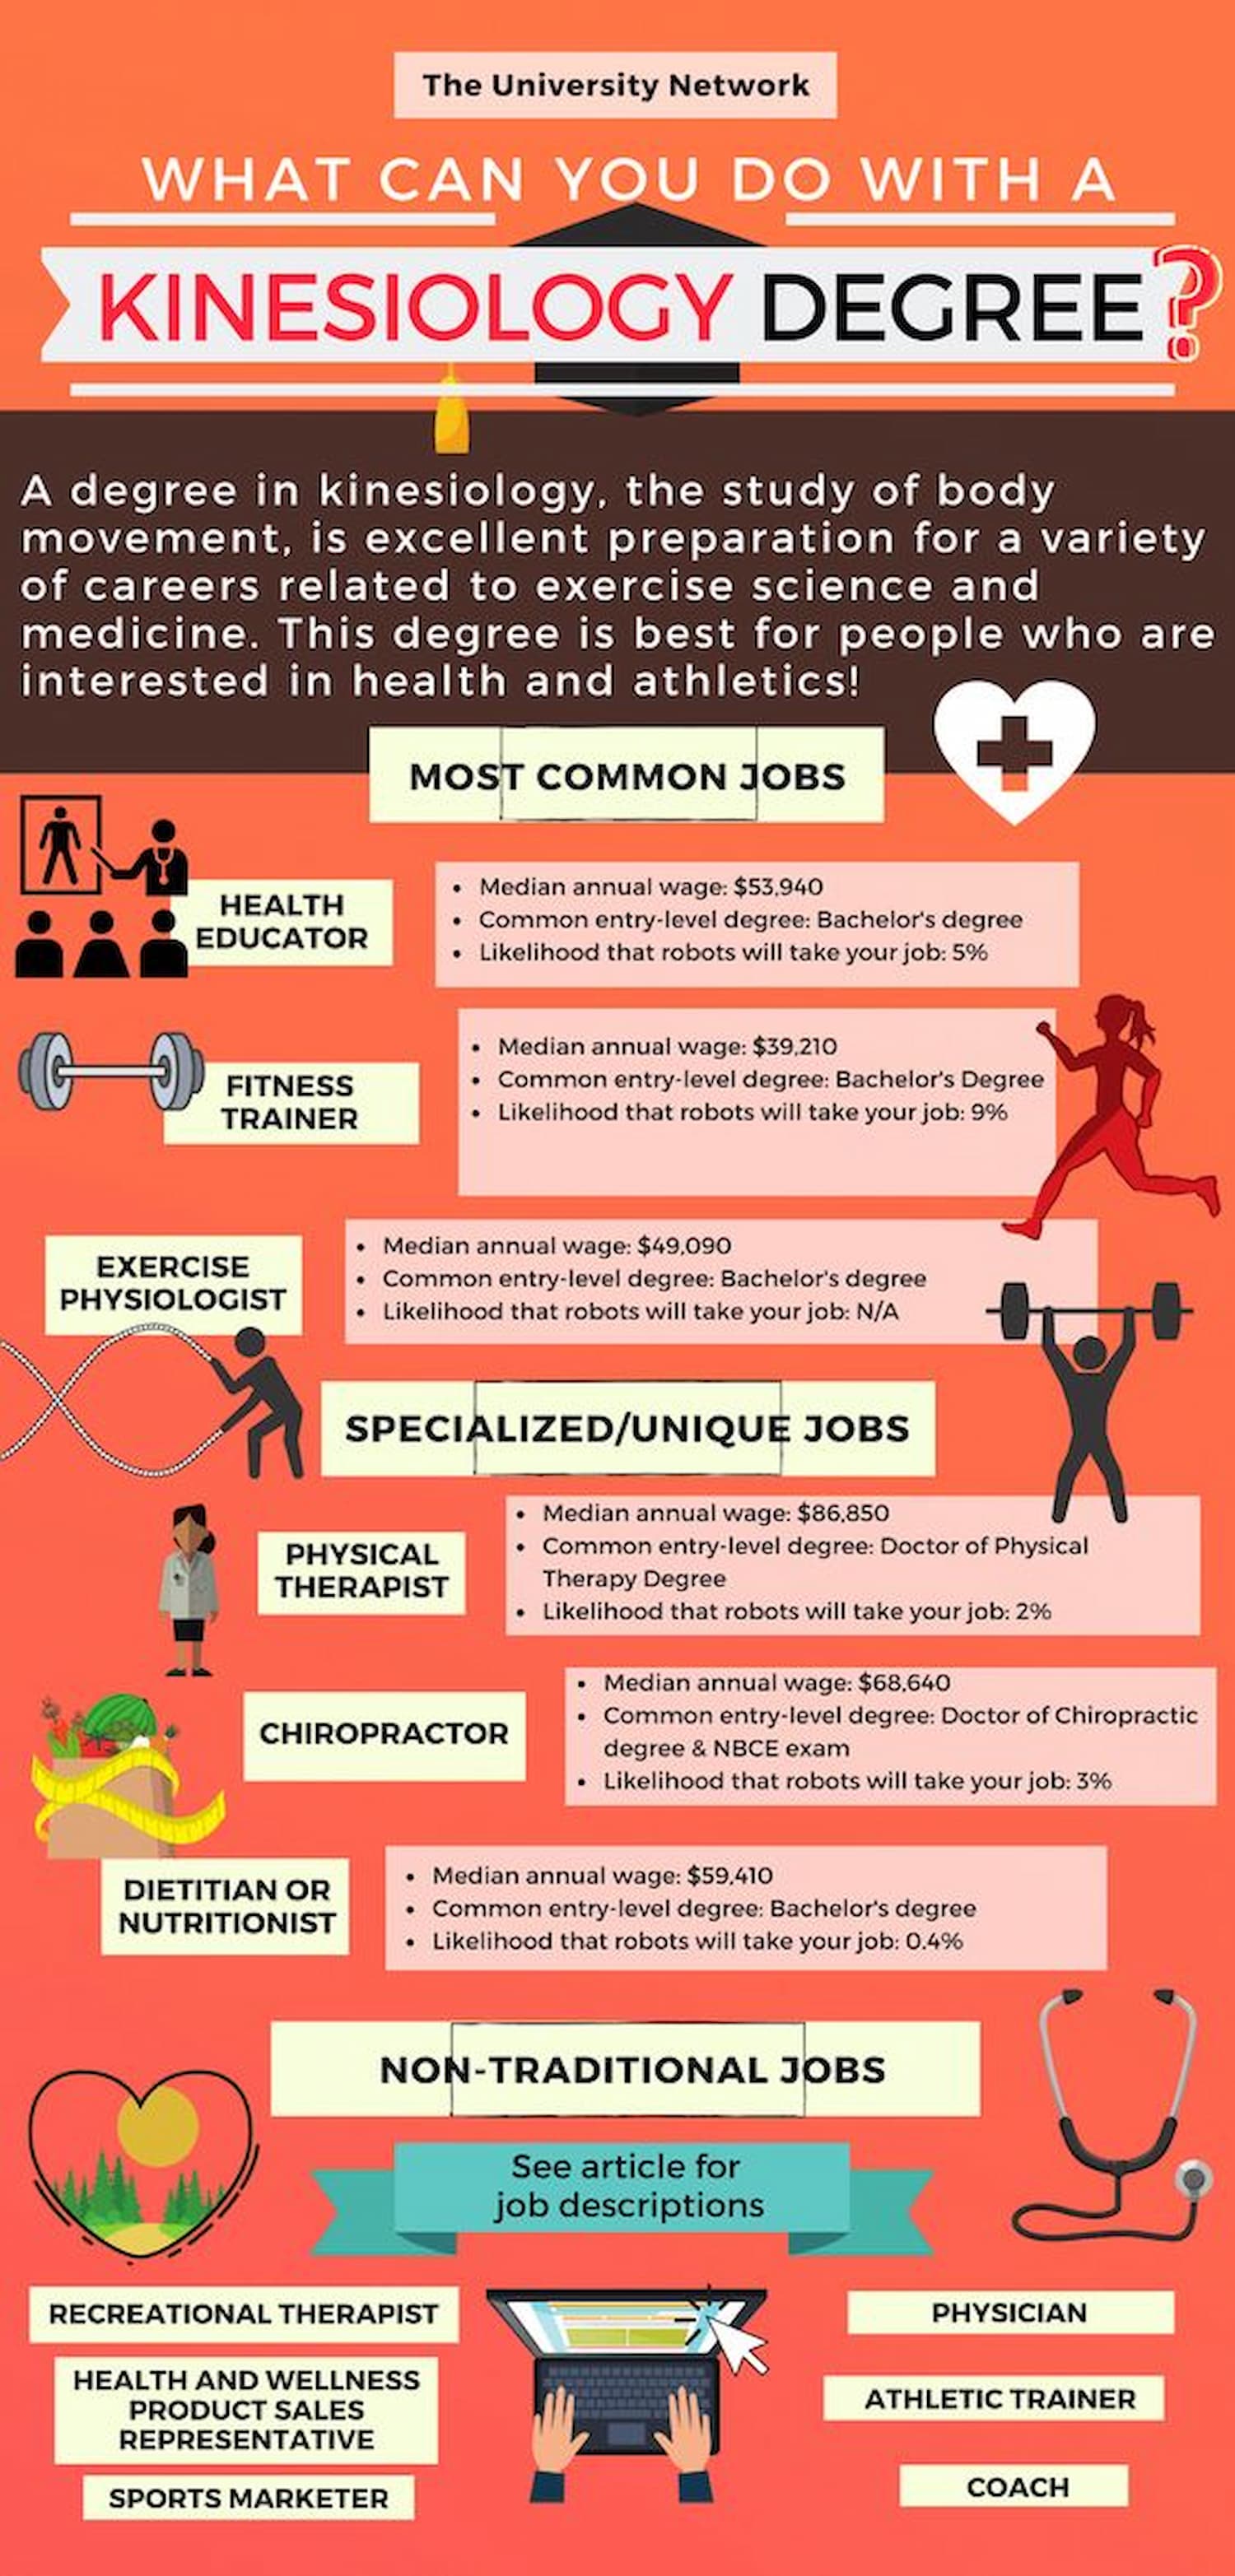 Career opportunities in kinesiology